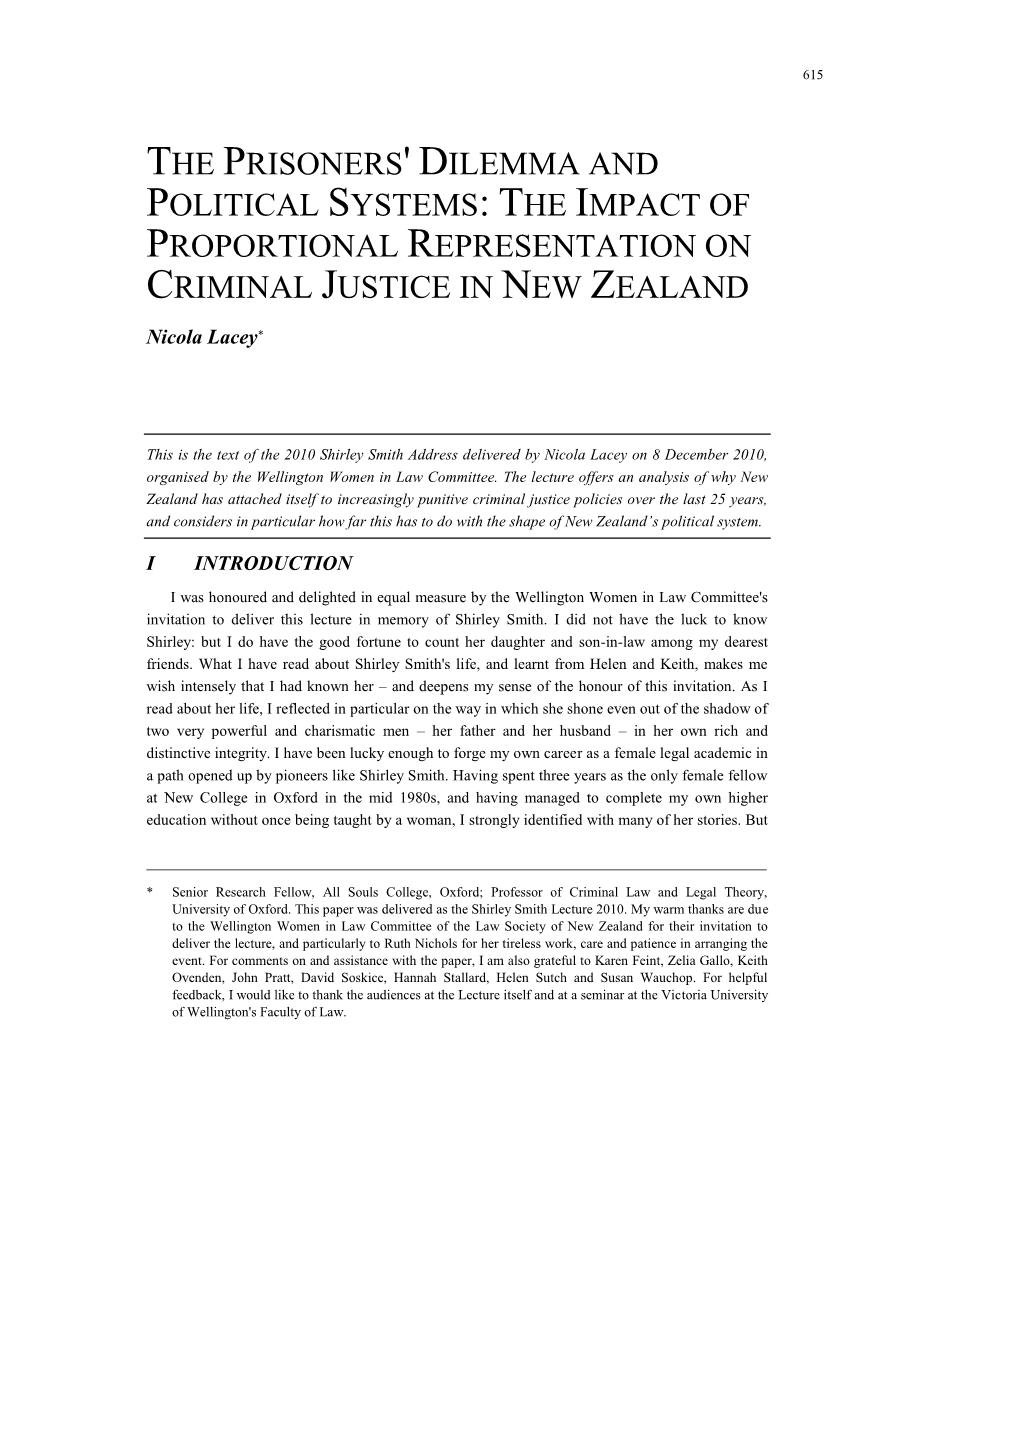 The Prisoners' Dilemma and Political Systems: the Impact of Proportional Representation on Criminal Justice in New Zealand